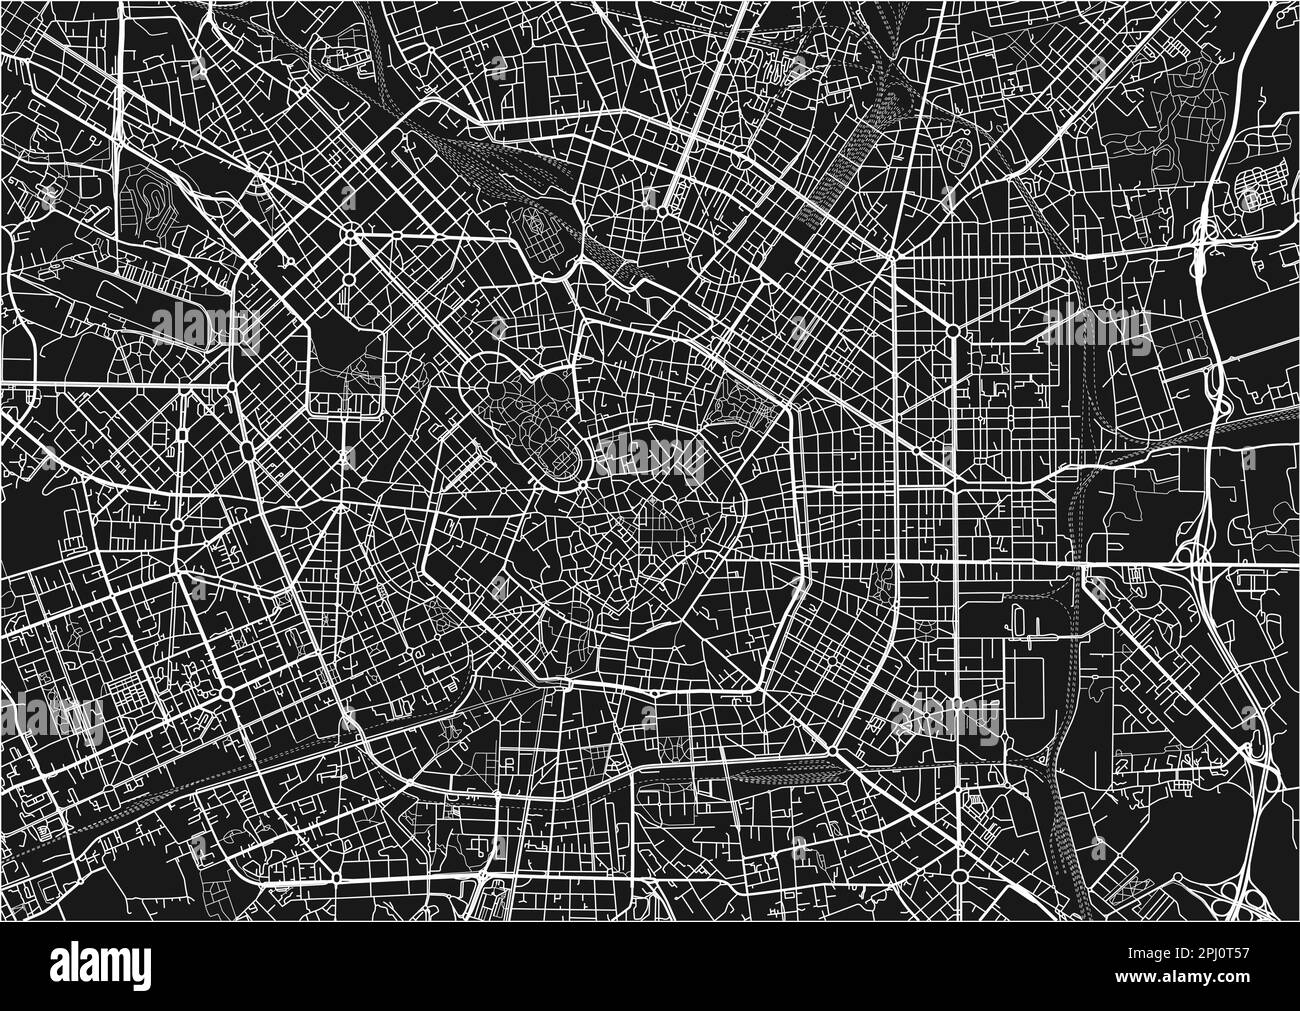 Black and white vector city map of Milan with well organized separated layers. Stock Vector